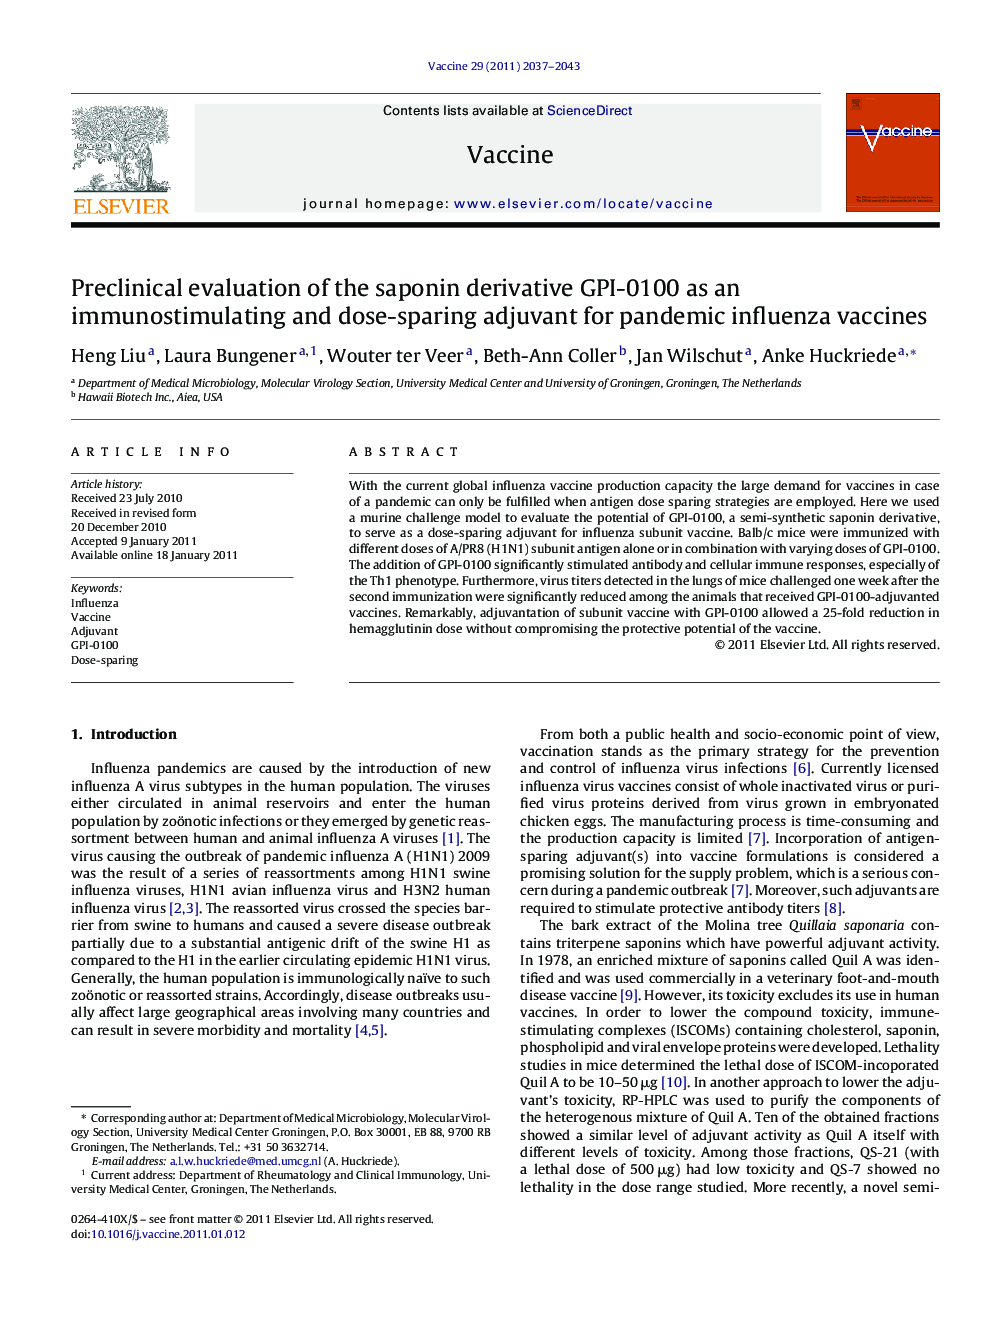 Preclinical evaluation of the saponin derivative GPI-0100 as an immunostimulating and dose-sparing adjuvant for pandemic influenza vaccines